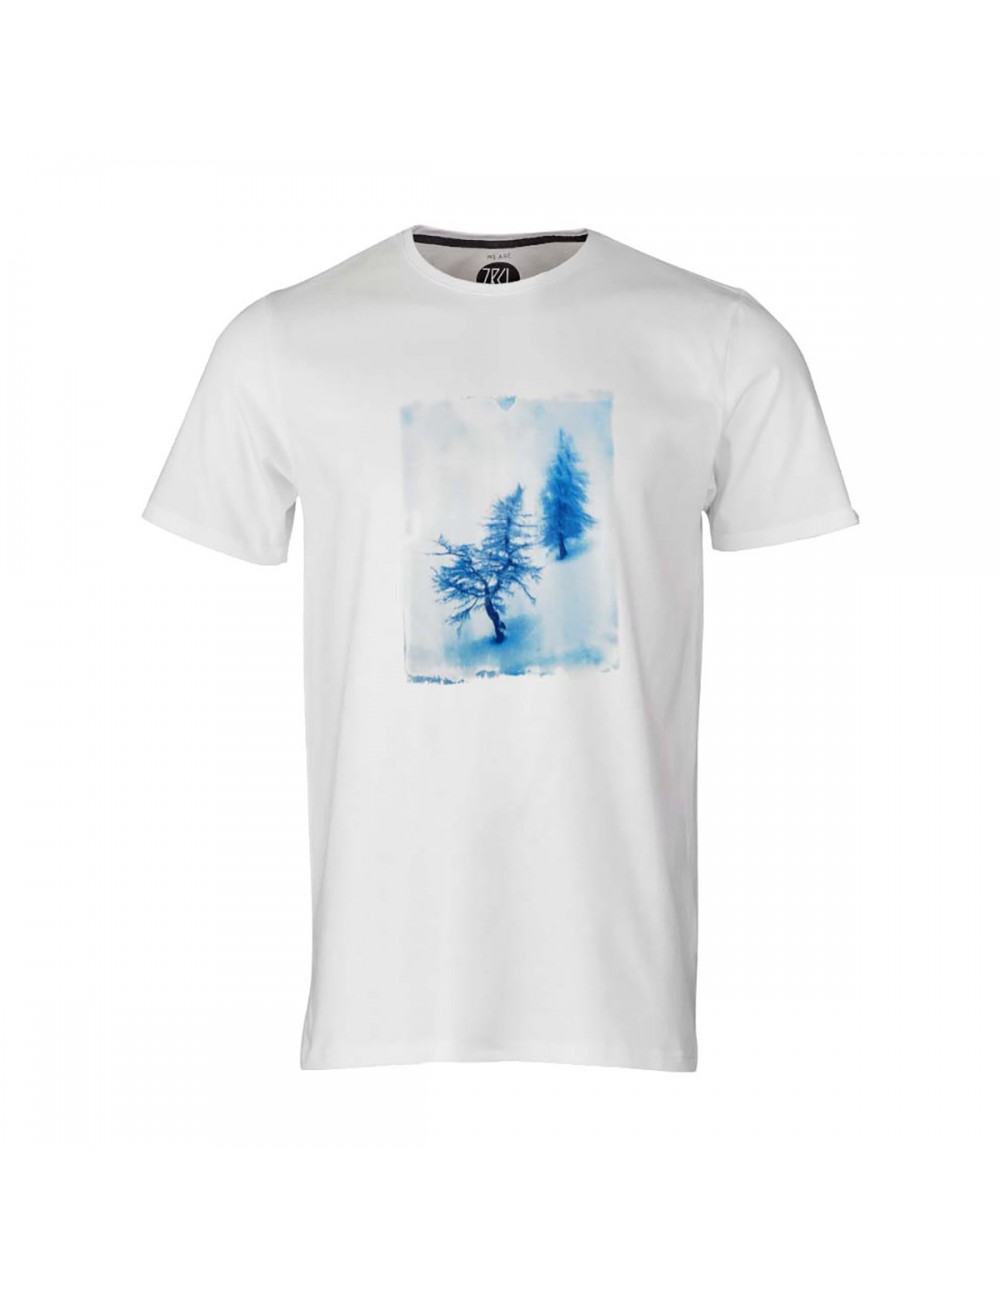 ZRCL T-Shirt Snowtree - White